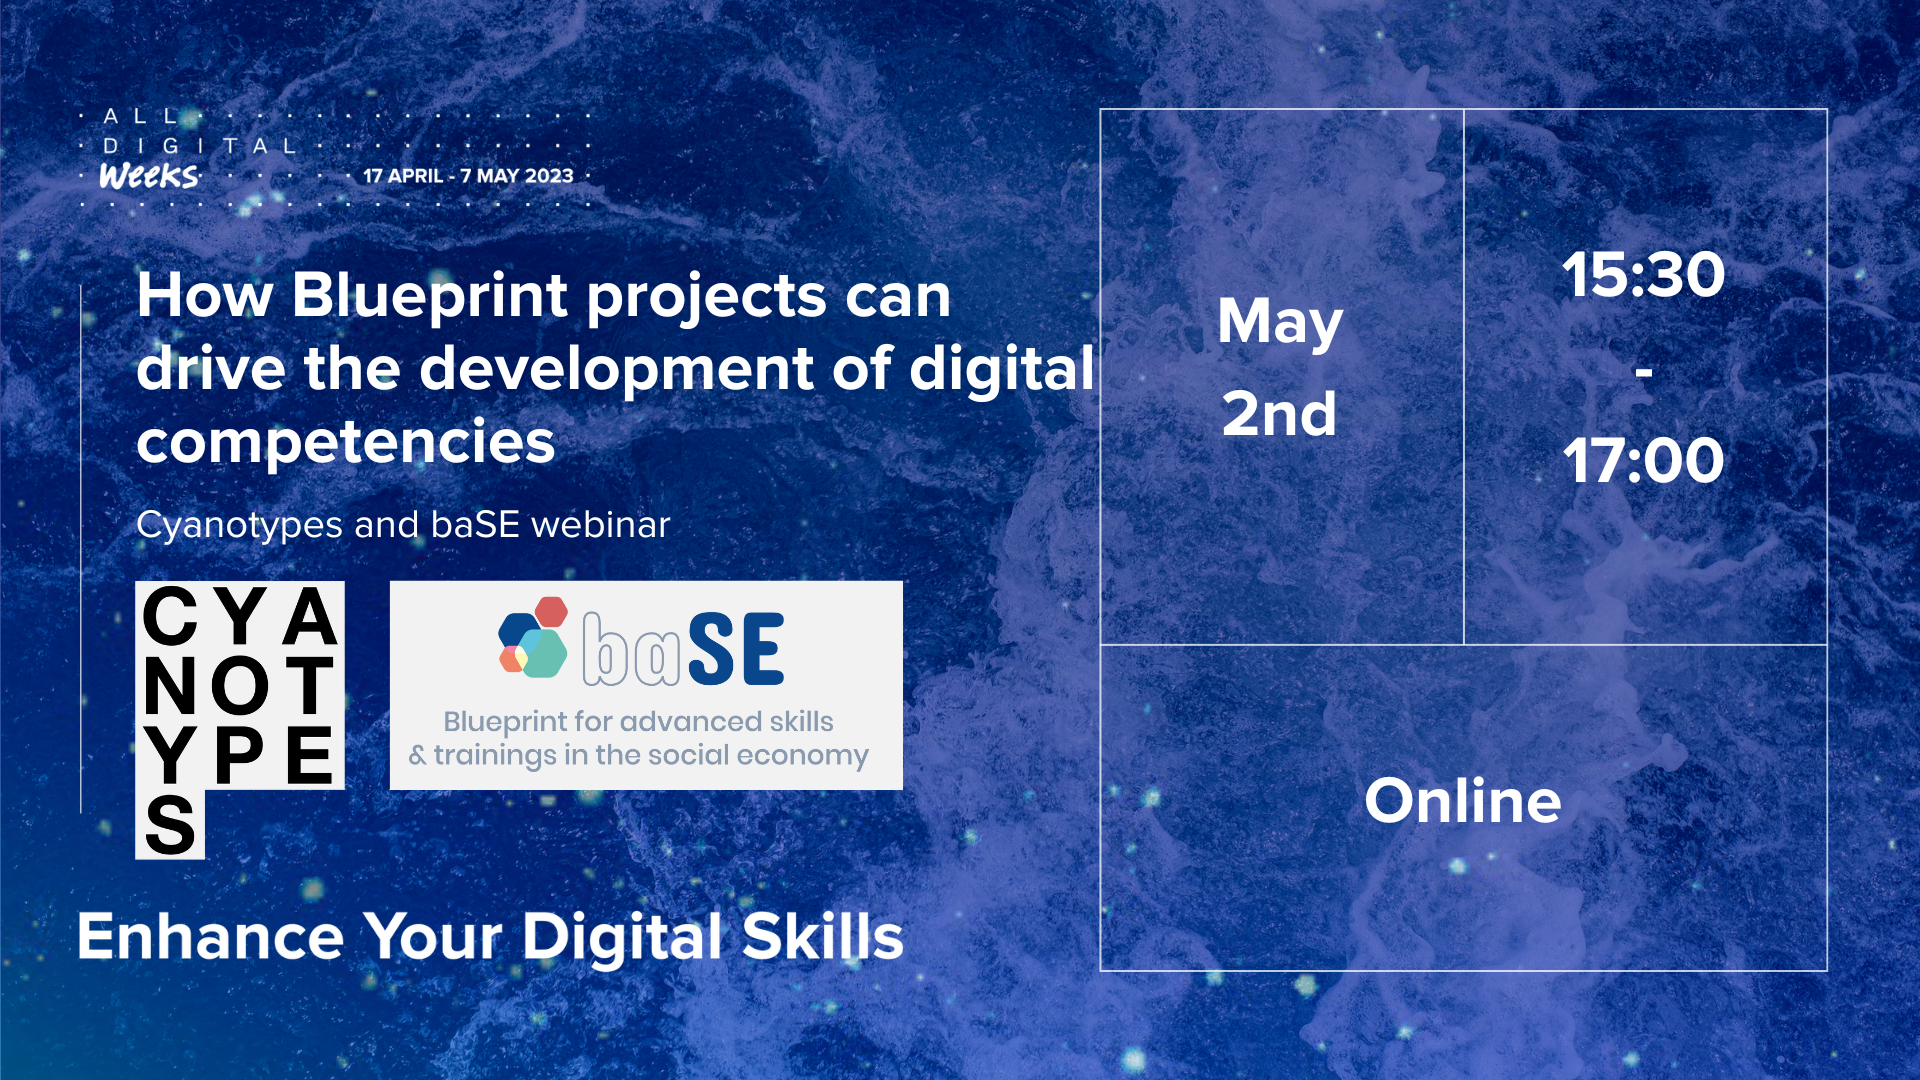 Cyanotypes and baSE webinar: How Blueprint projects can drive the development of digital competencies